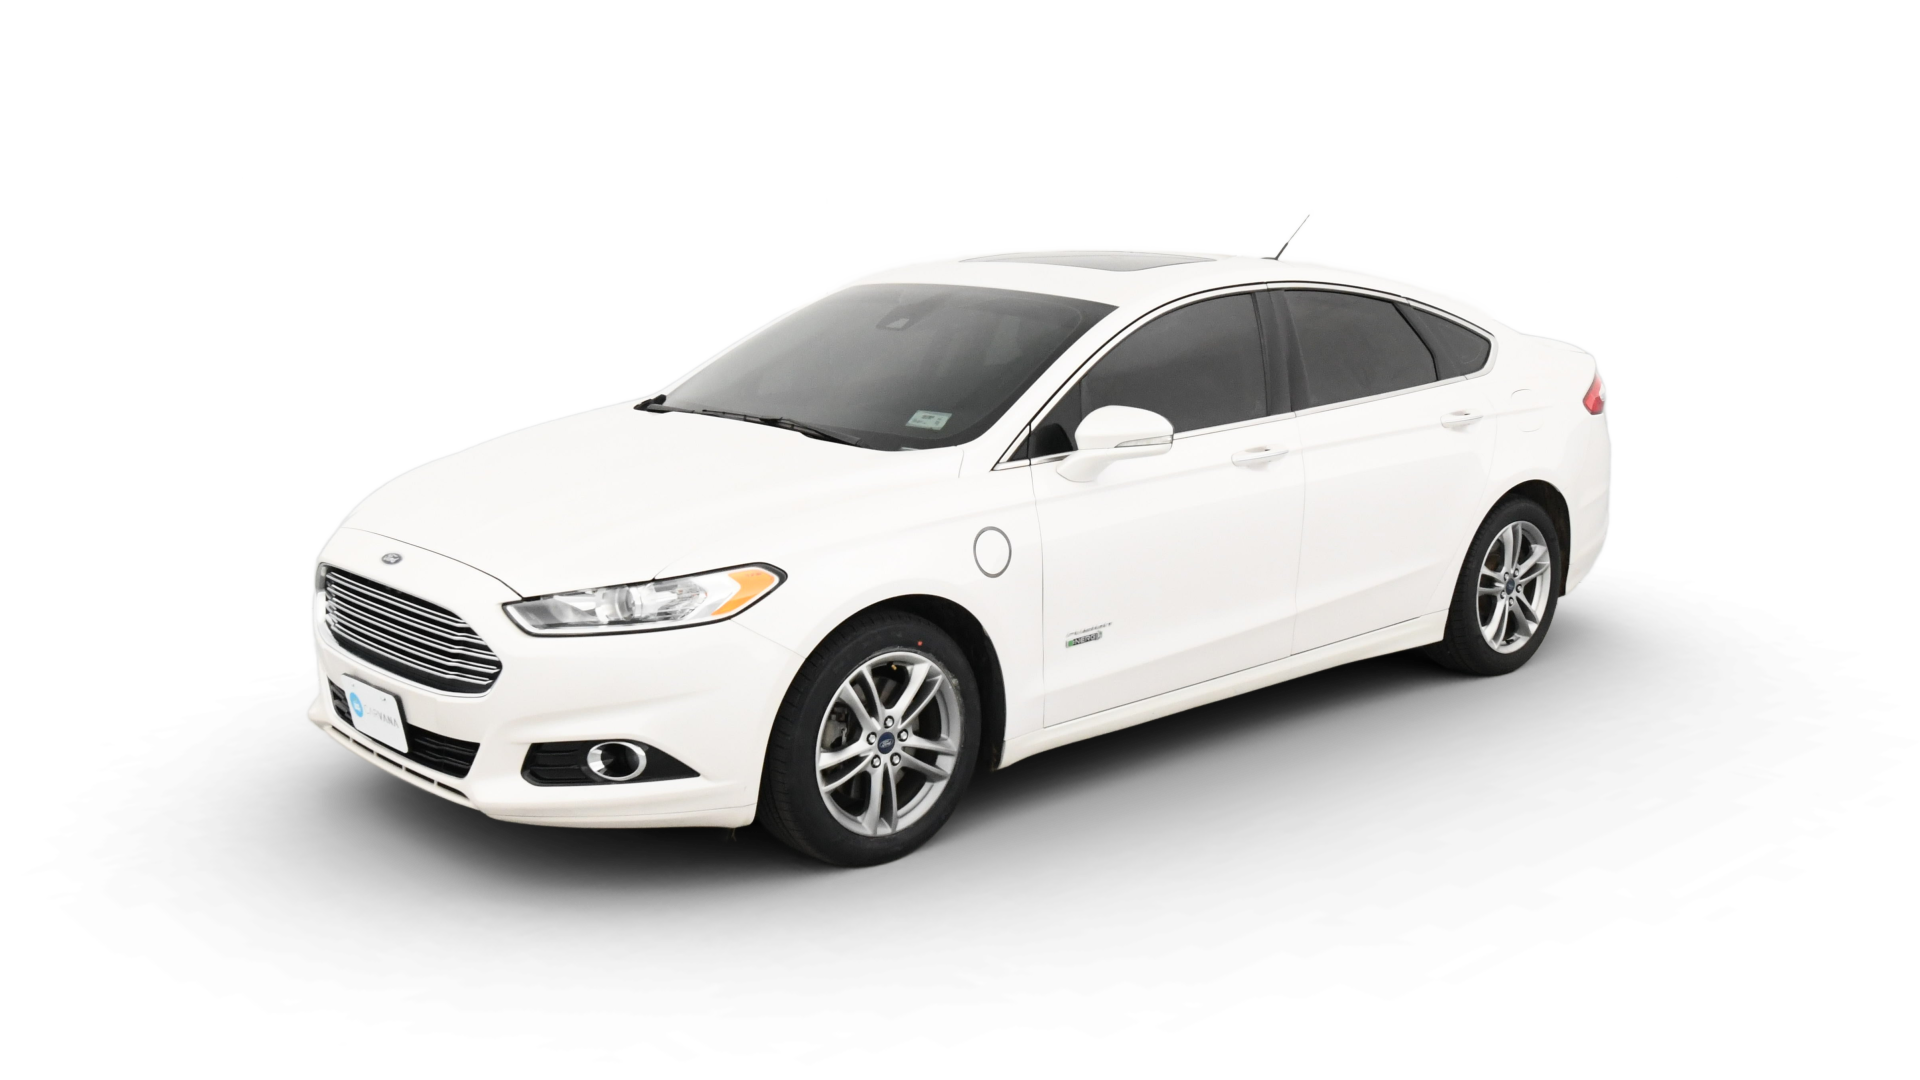 Used 2016 Ford Fusion Energi For Sale Online | Carvana